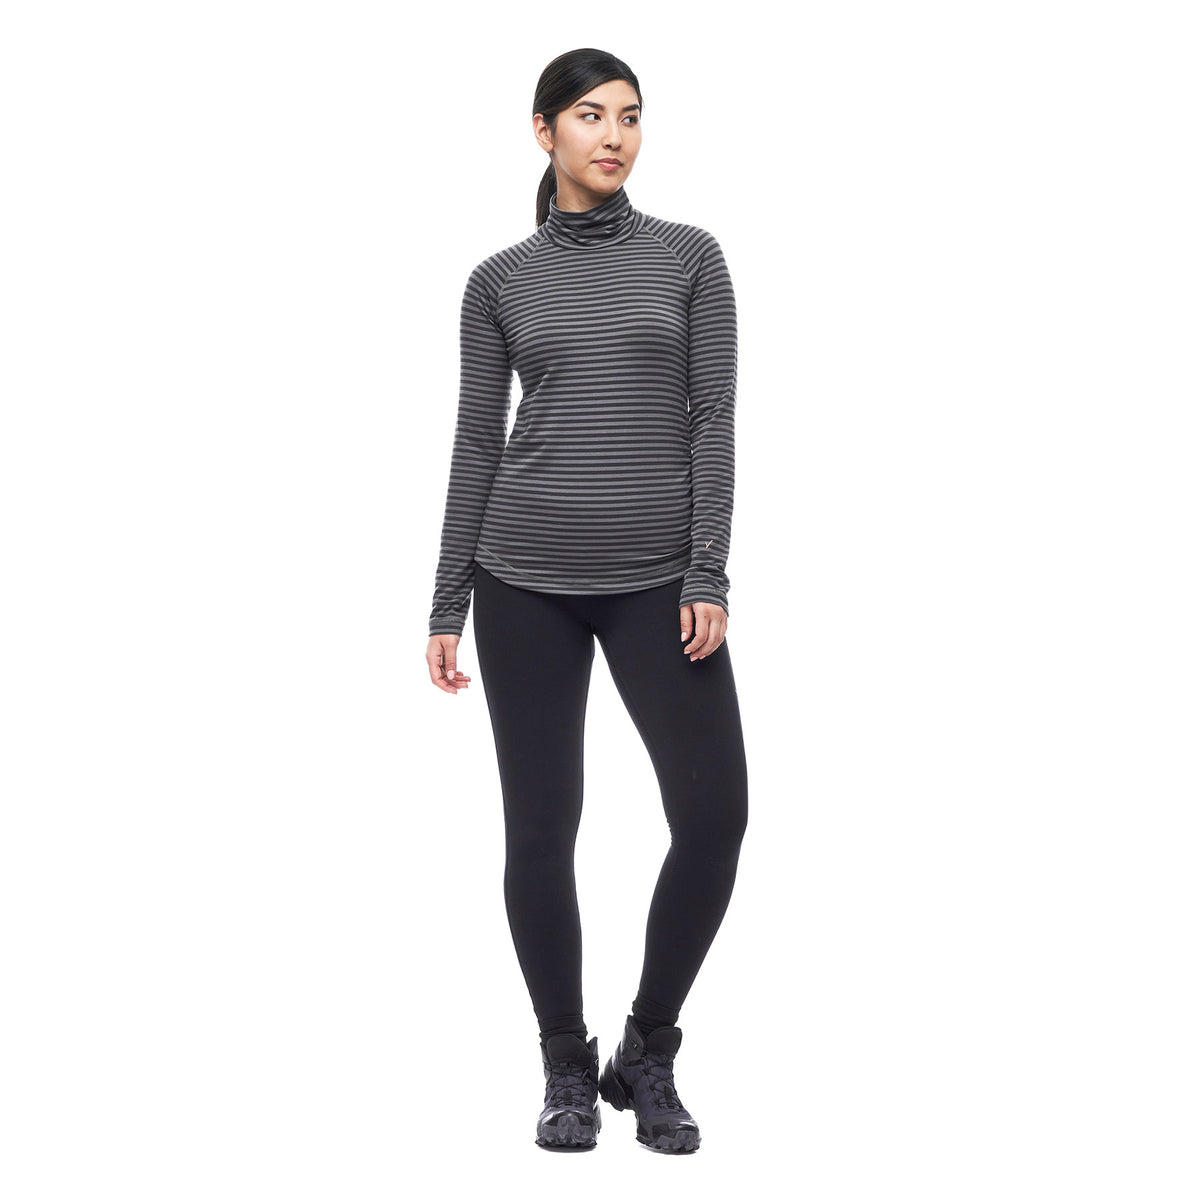 Hero image featuring a front facing model wearing the Indyeva Riga II long sleeve shirt in pine ivy with black leggings.